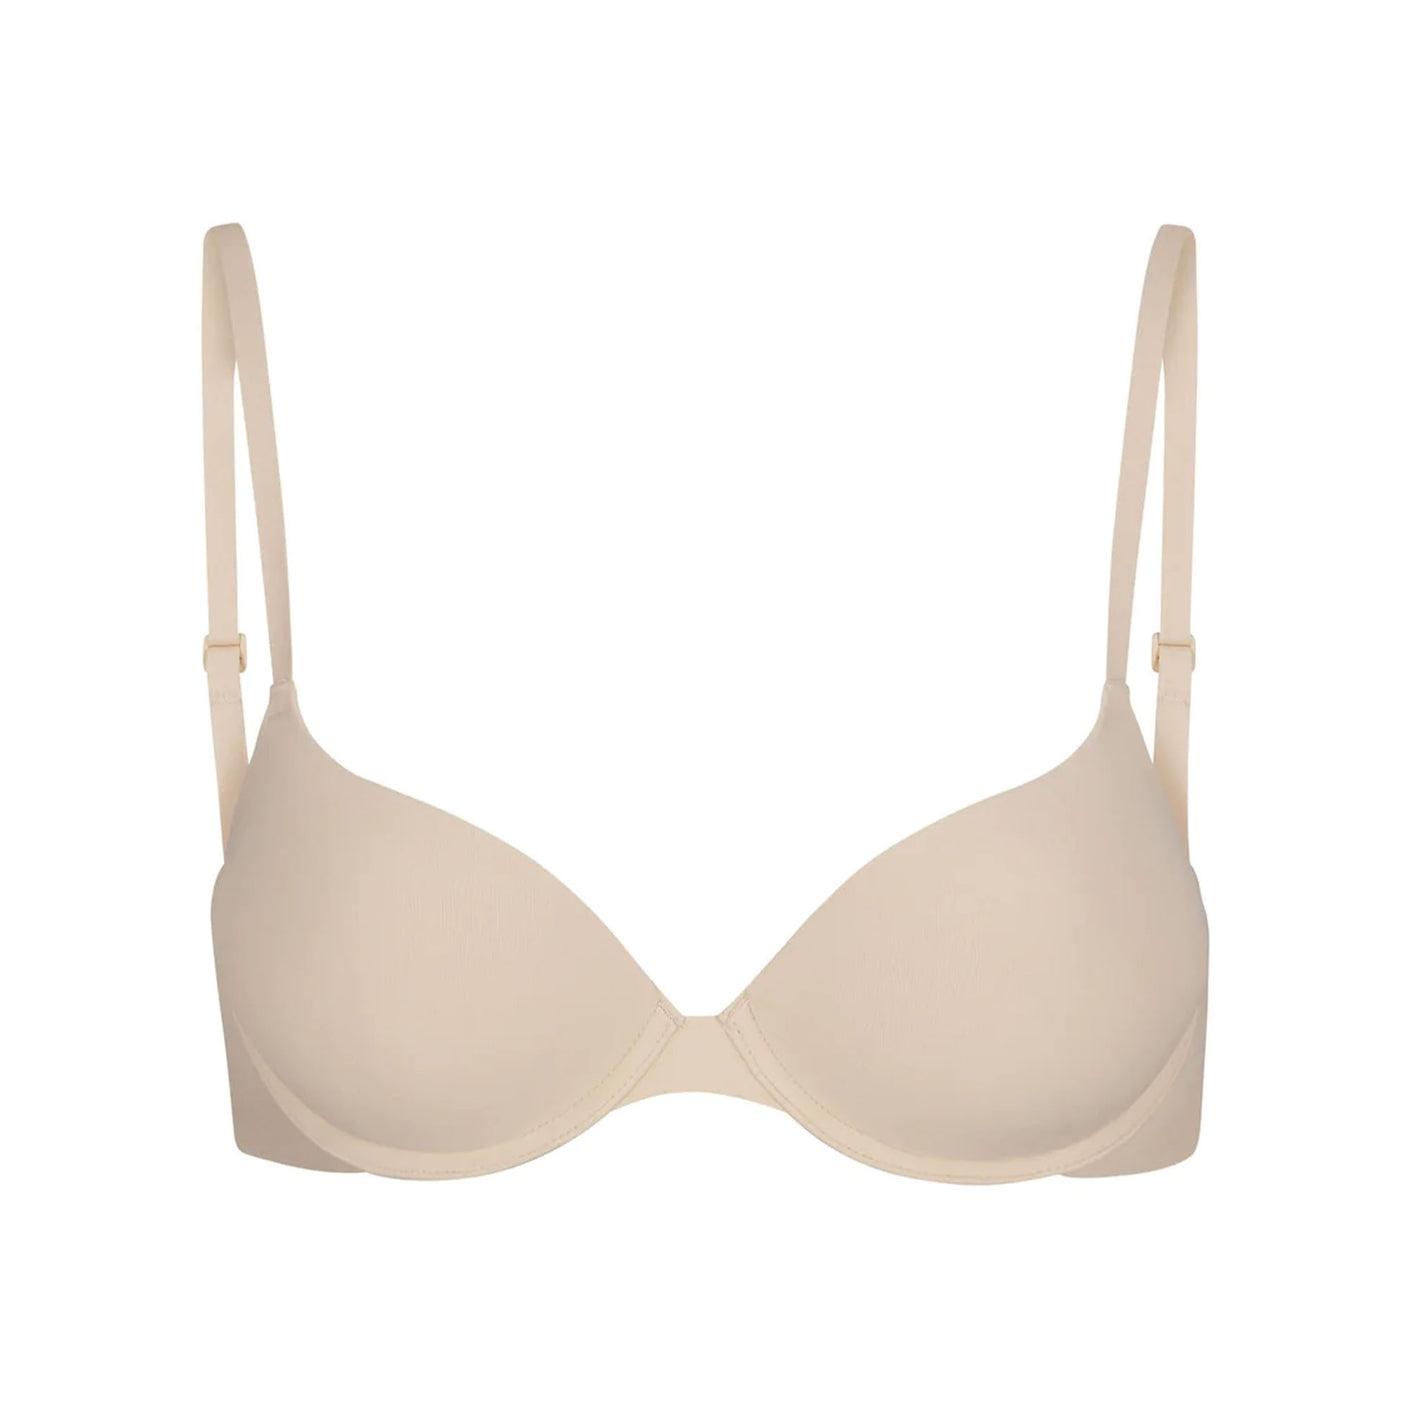 Finally a bra that's comfortable and fits like a dream! To my